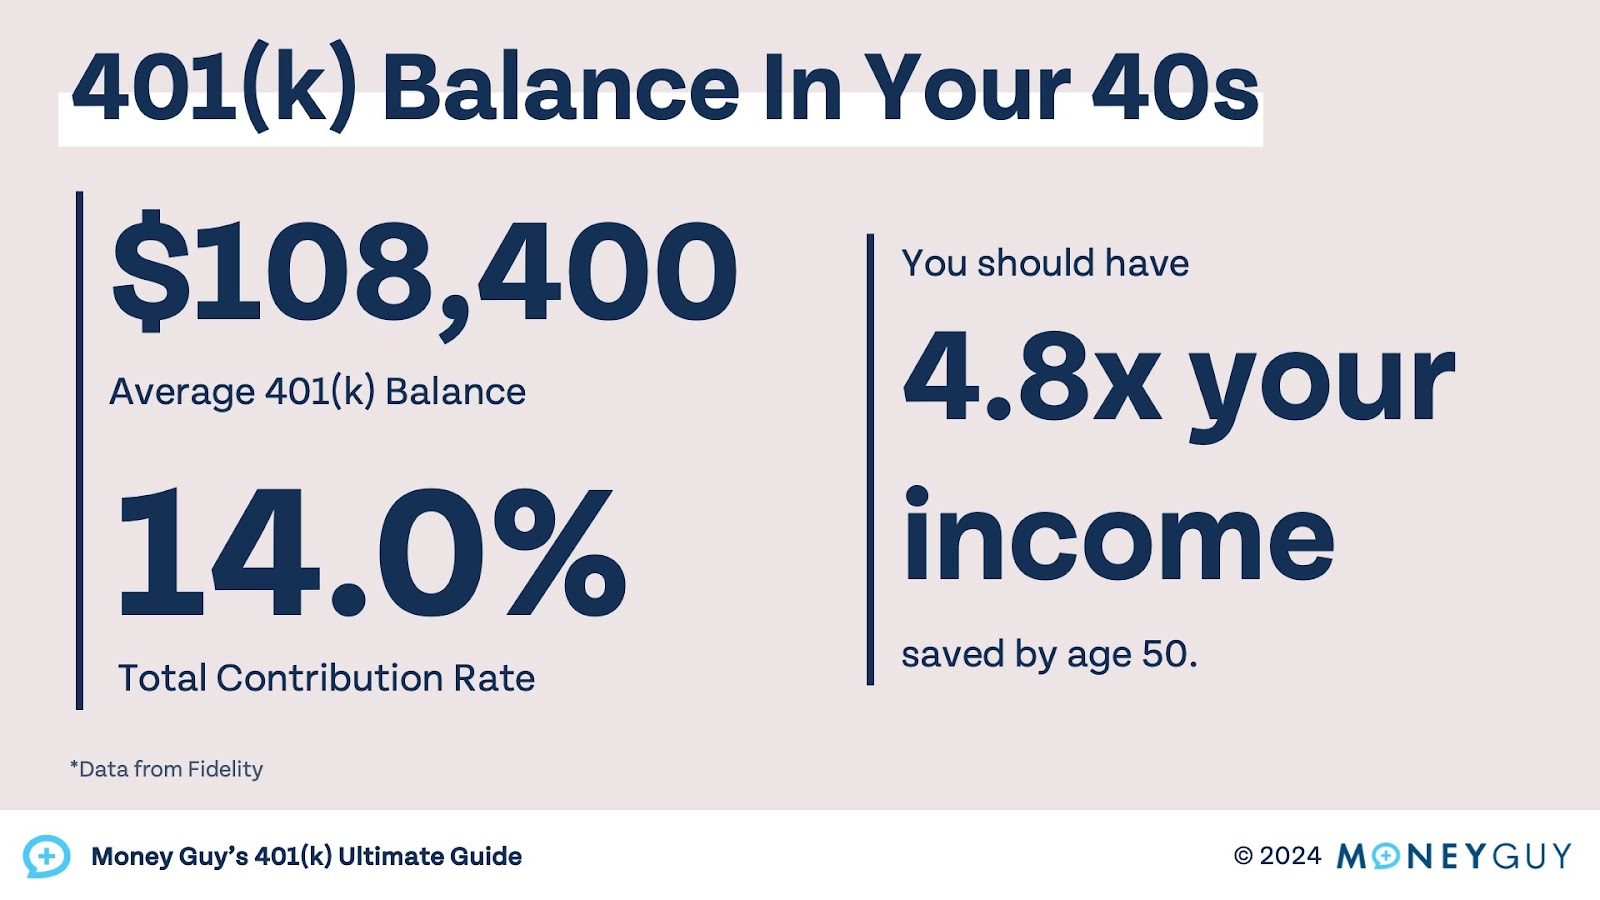 This shows the average 401(k) balance by age in your 40s.